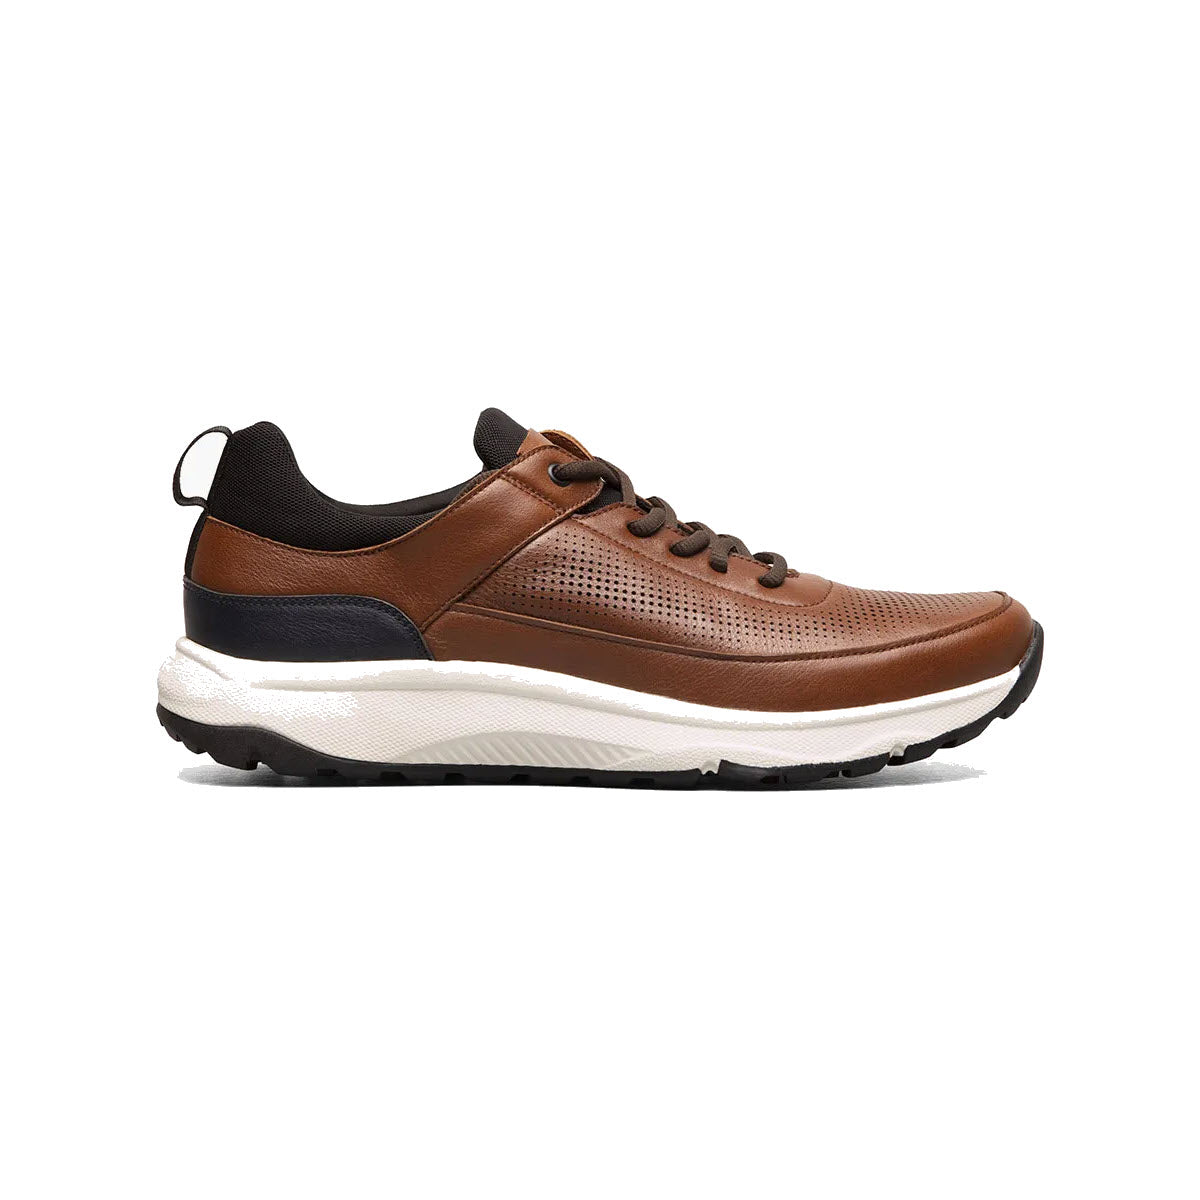 A single brown leather Florsheim Satellite Perf Elastic Lace Slip On Sneaker with white sole, featuring lace-up front and black detailing on the heel.